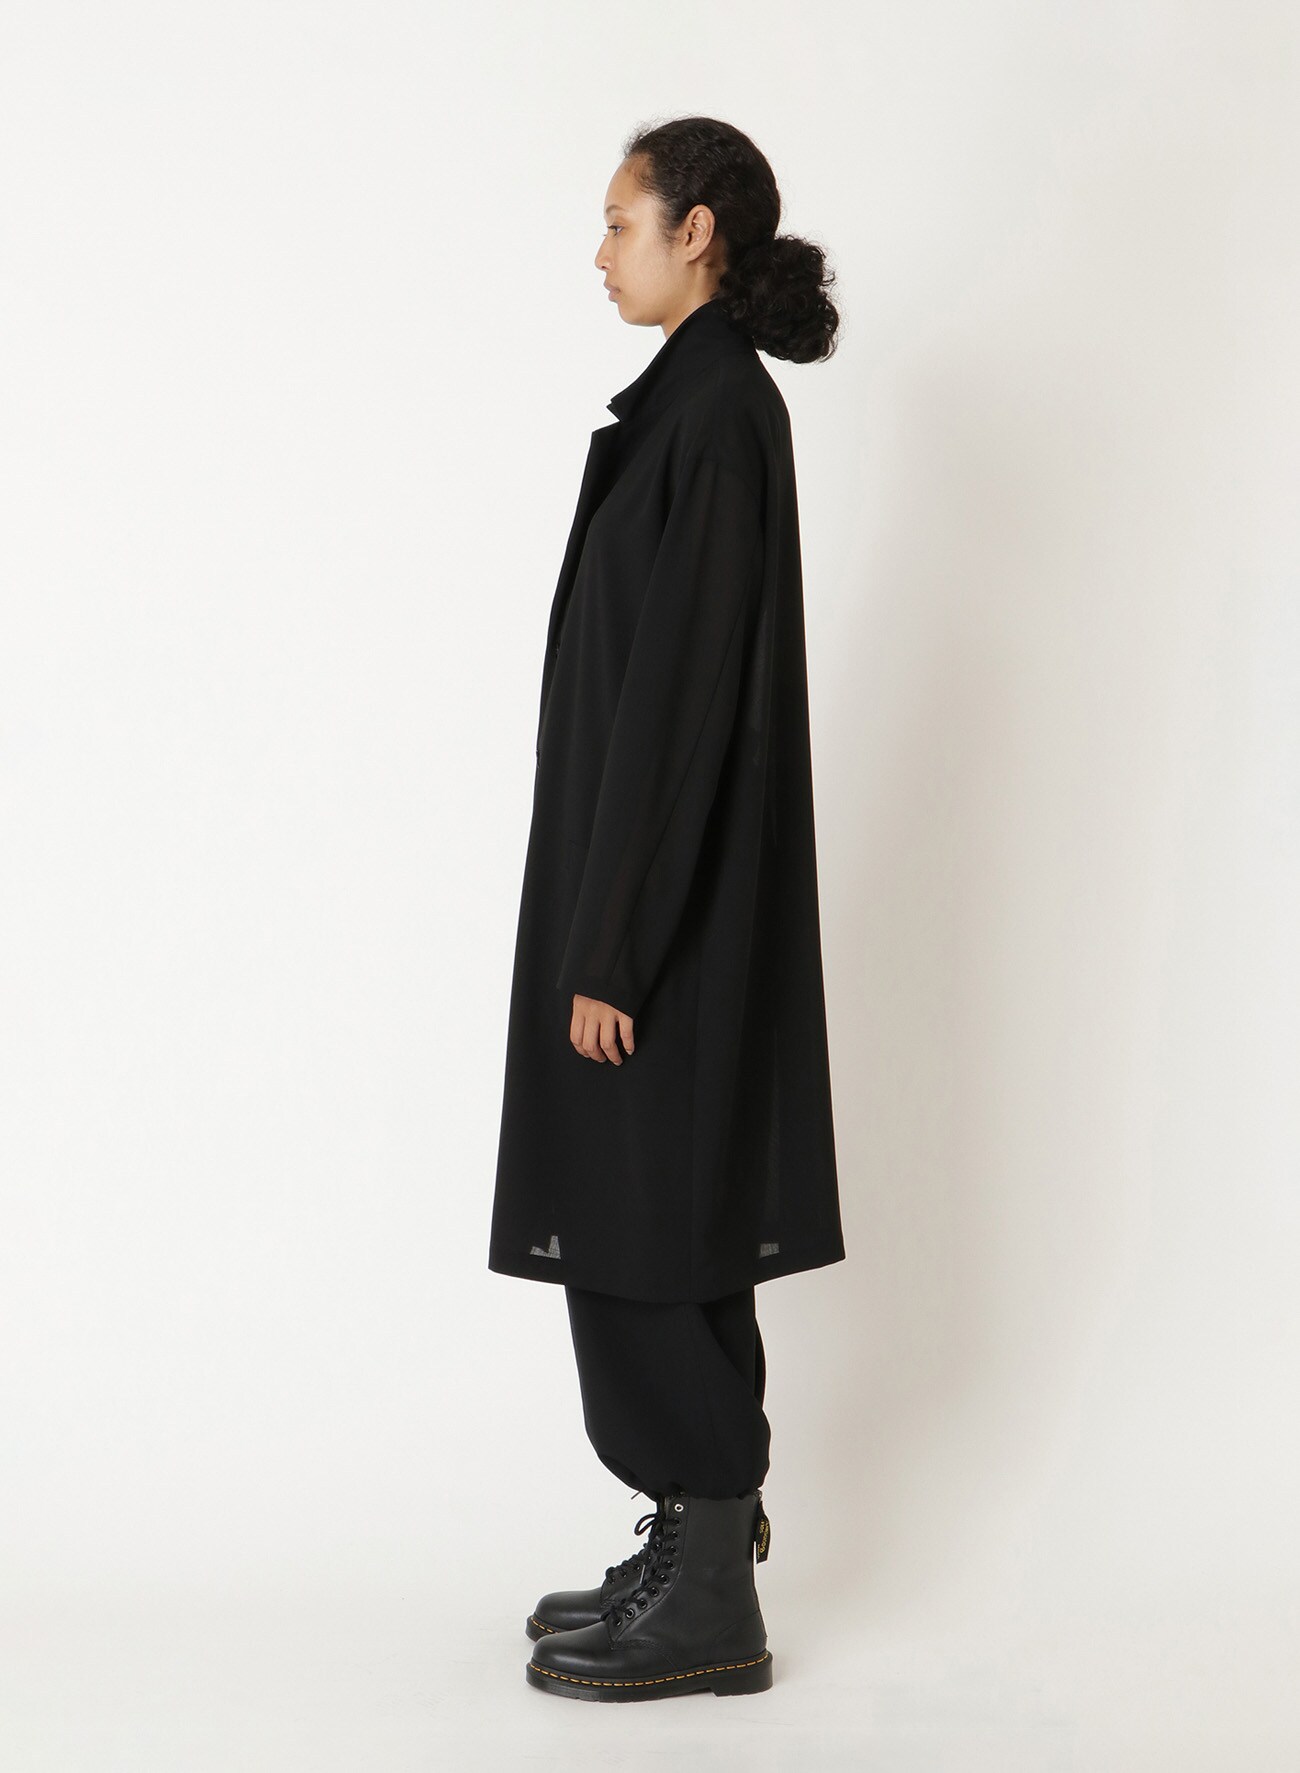 Pe/ STRONG TWISTED CLOTH LONG JACKET